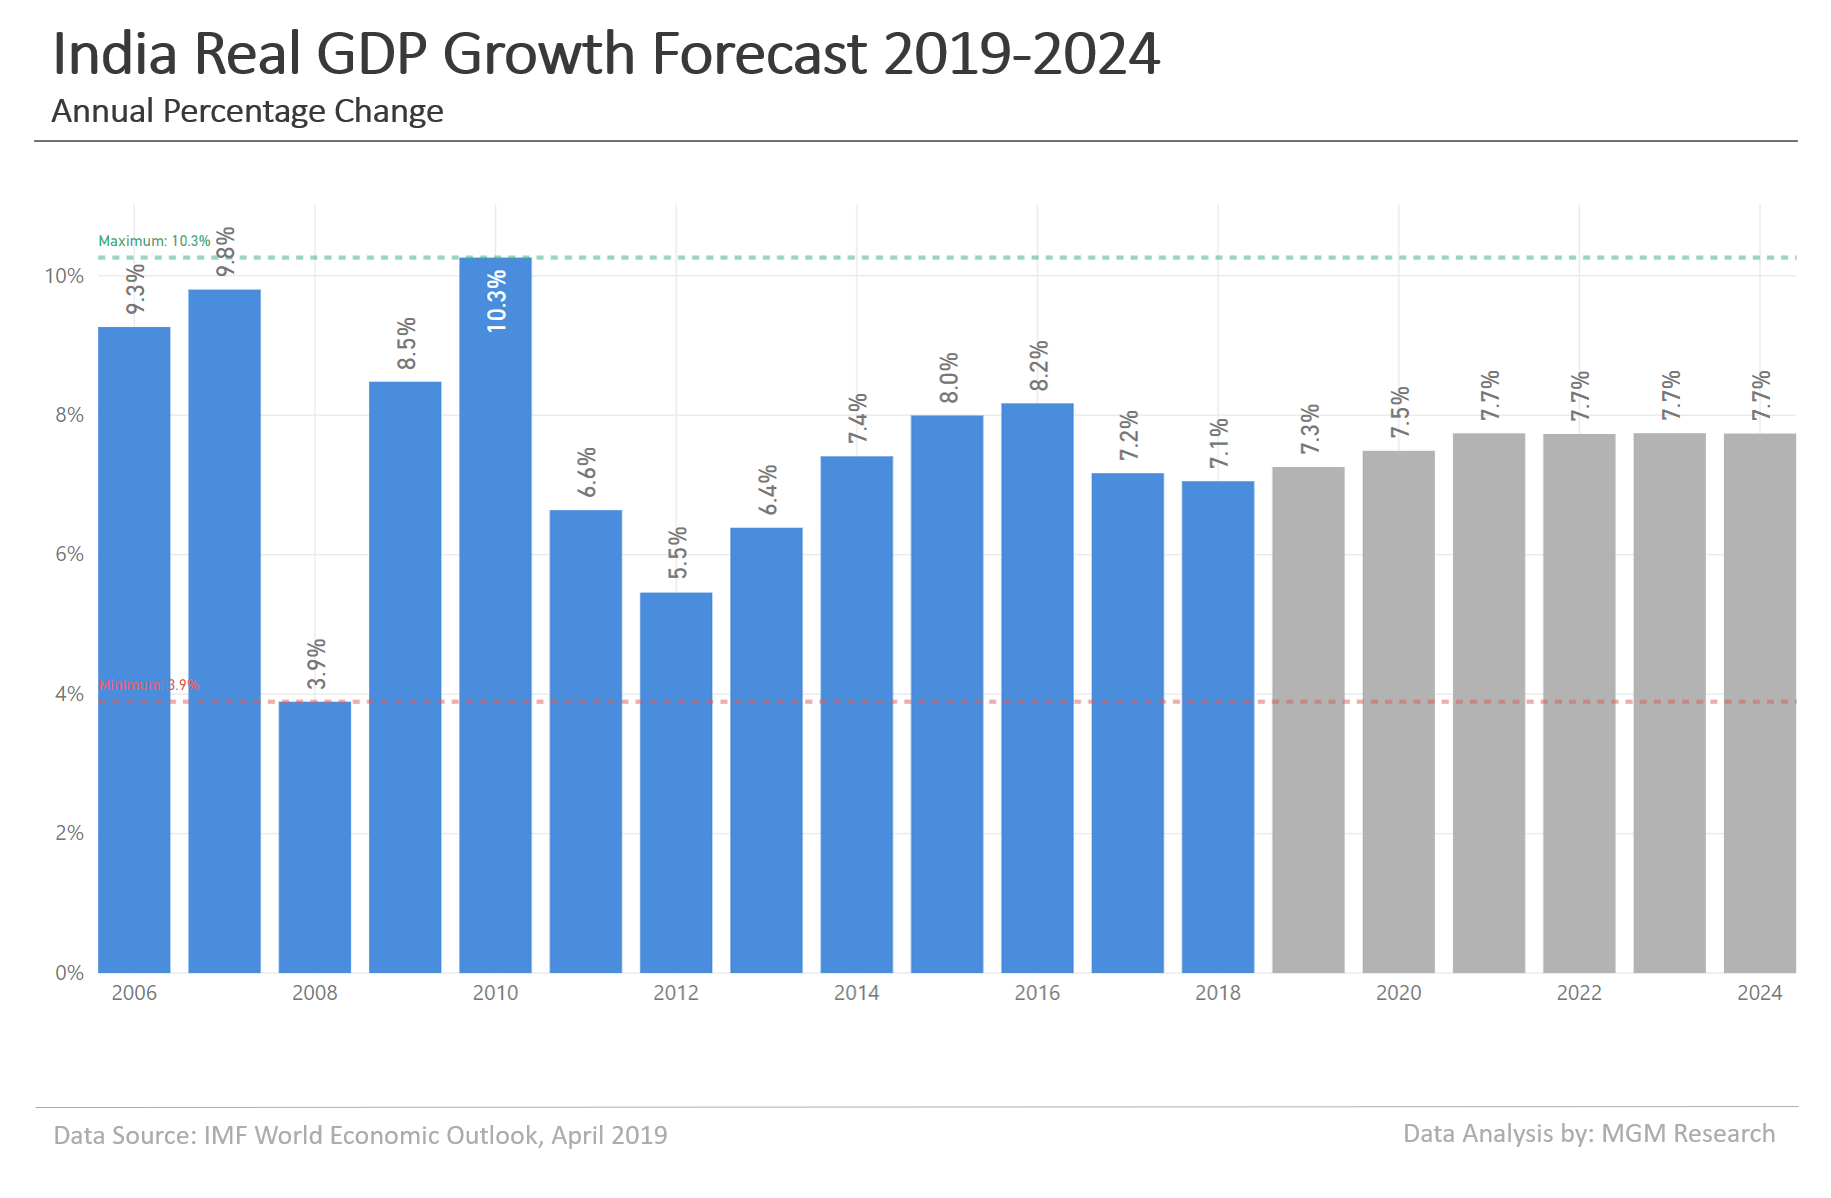 India real GDP growth forecast 2019-2024